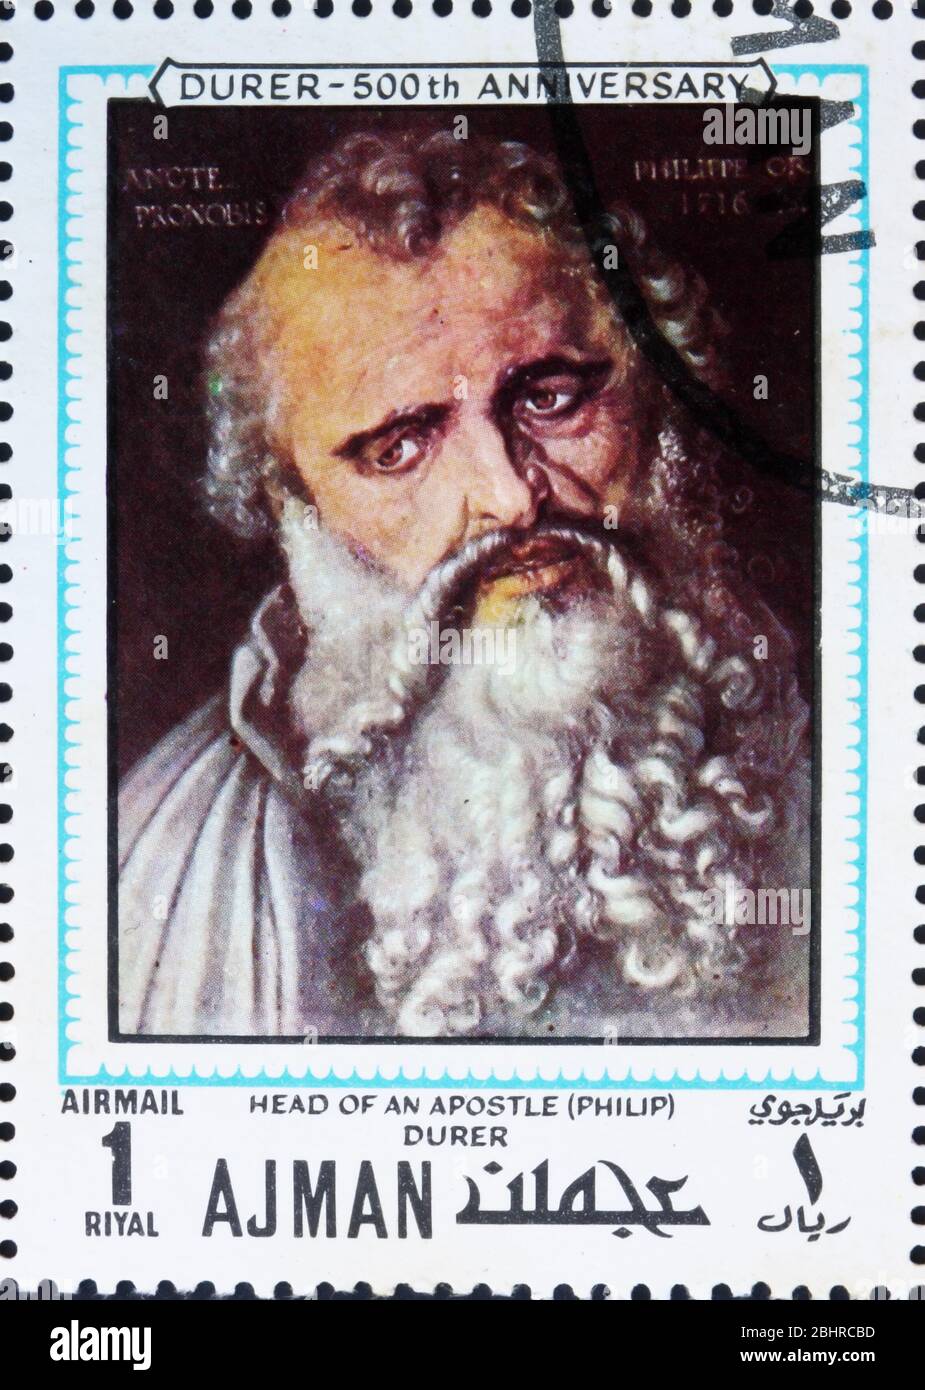 AJMAN - CIRCA 1970: a stamp printed in the Ajman shows Apostle Philip, Painting by Albrecht Durer, 500th Anniversary of the Birth, circa 1970 Stock Photo